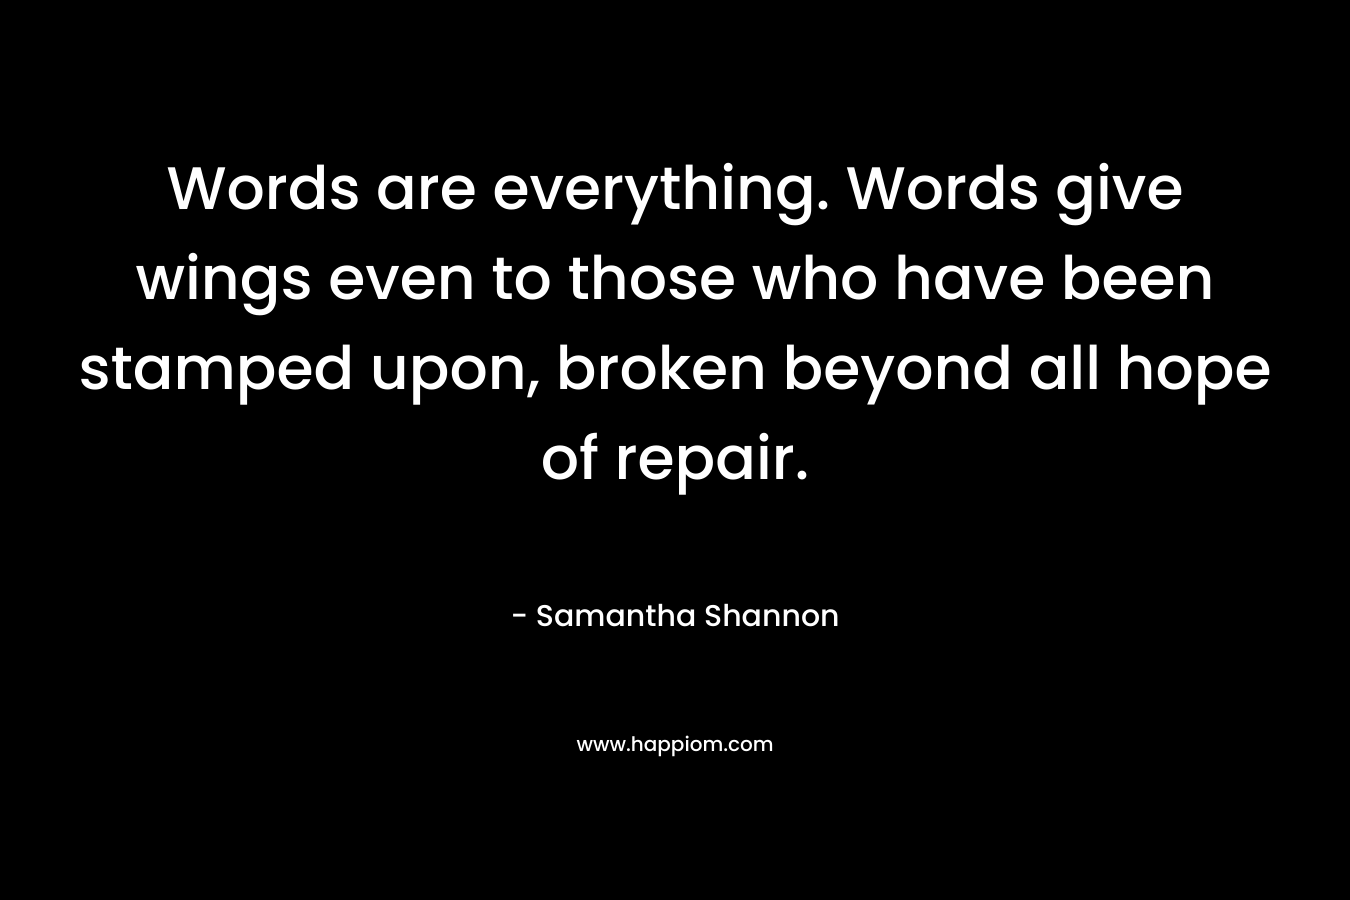 Words are everything. Words give wings even to those who have been stamped upon, broken beyond all hope of repair.